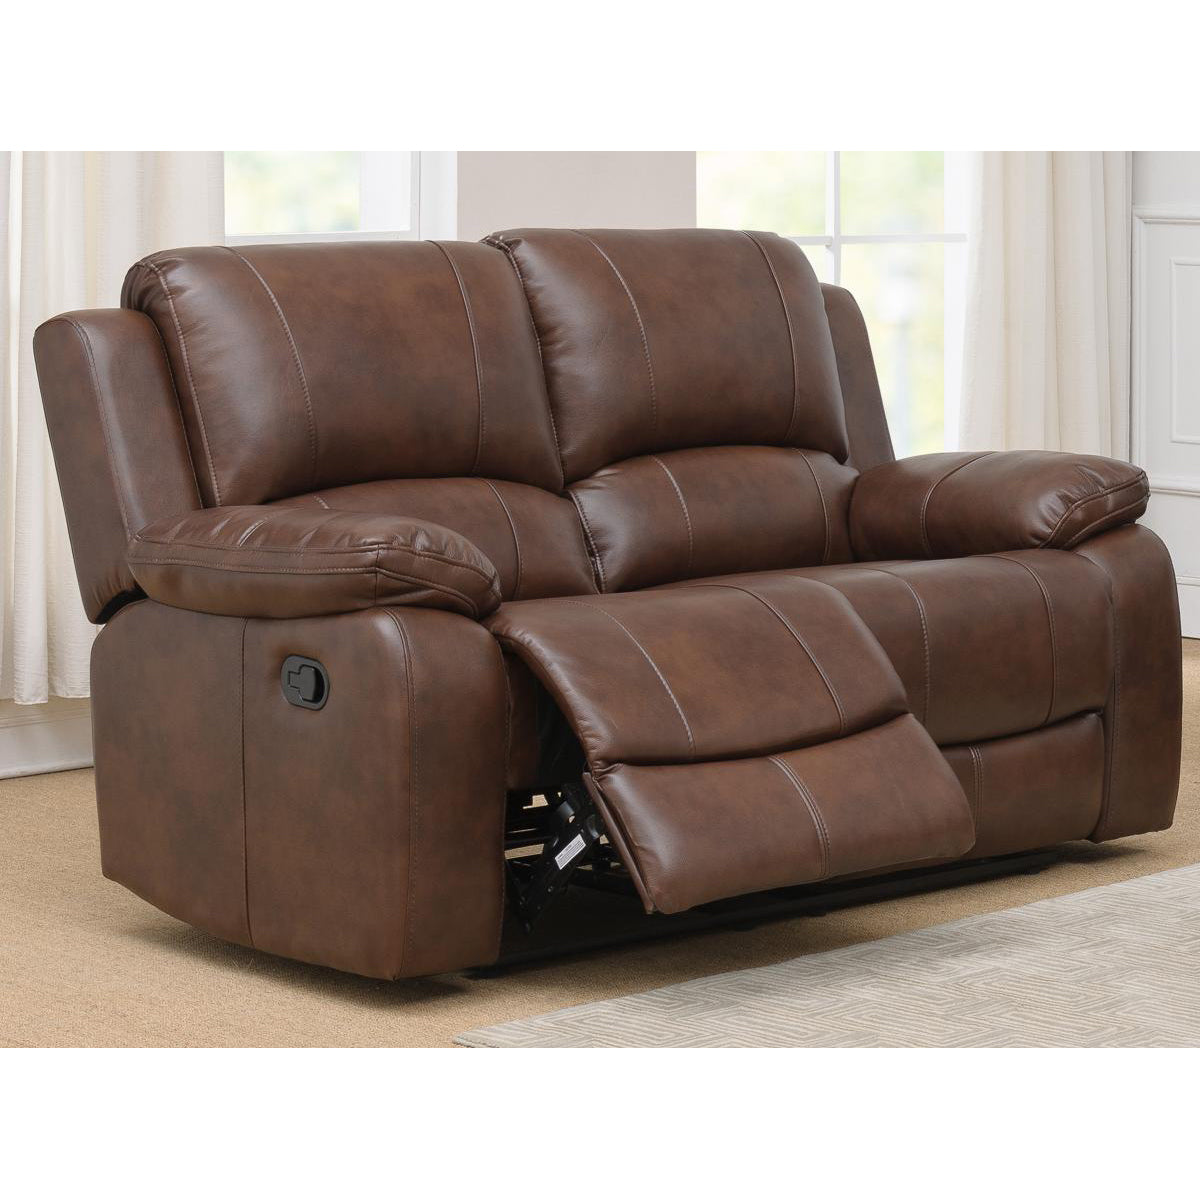 Andalusia Recliner Leathergel And PU 2 Seater Whiskey